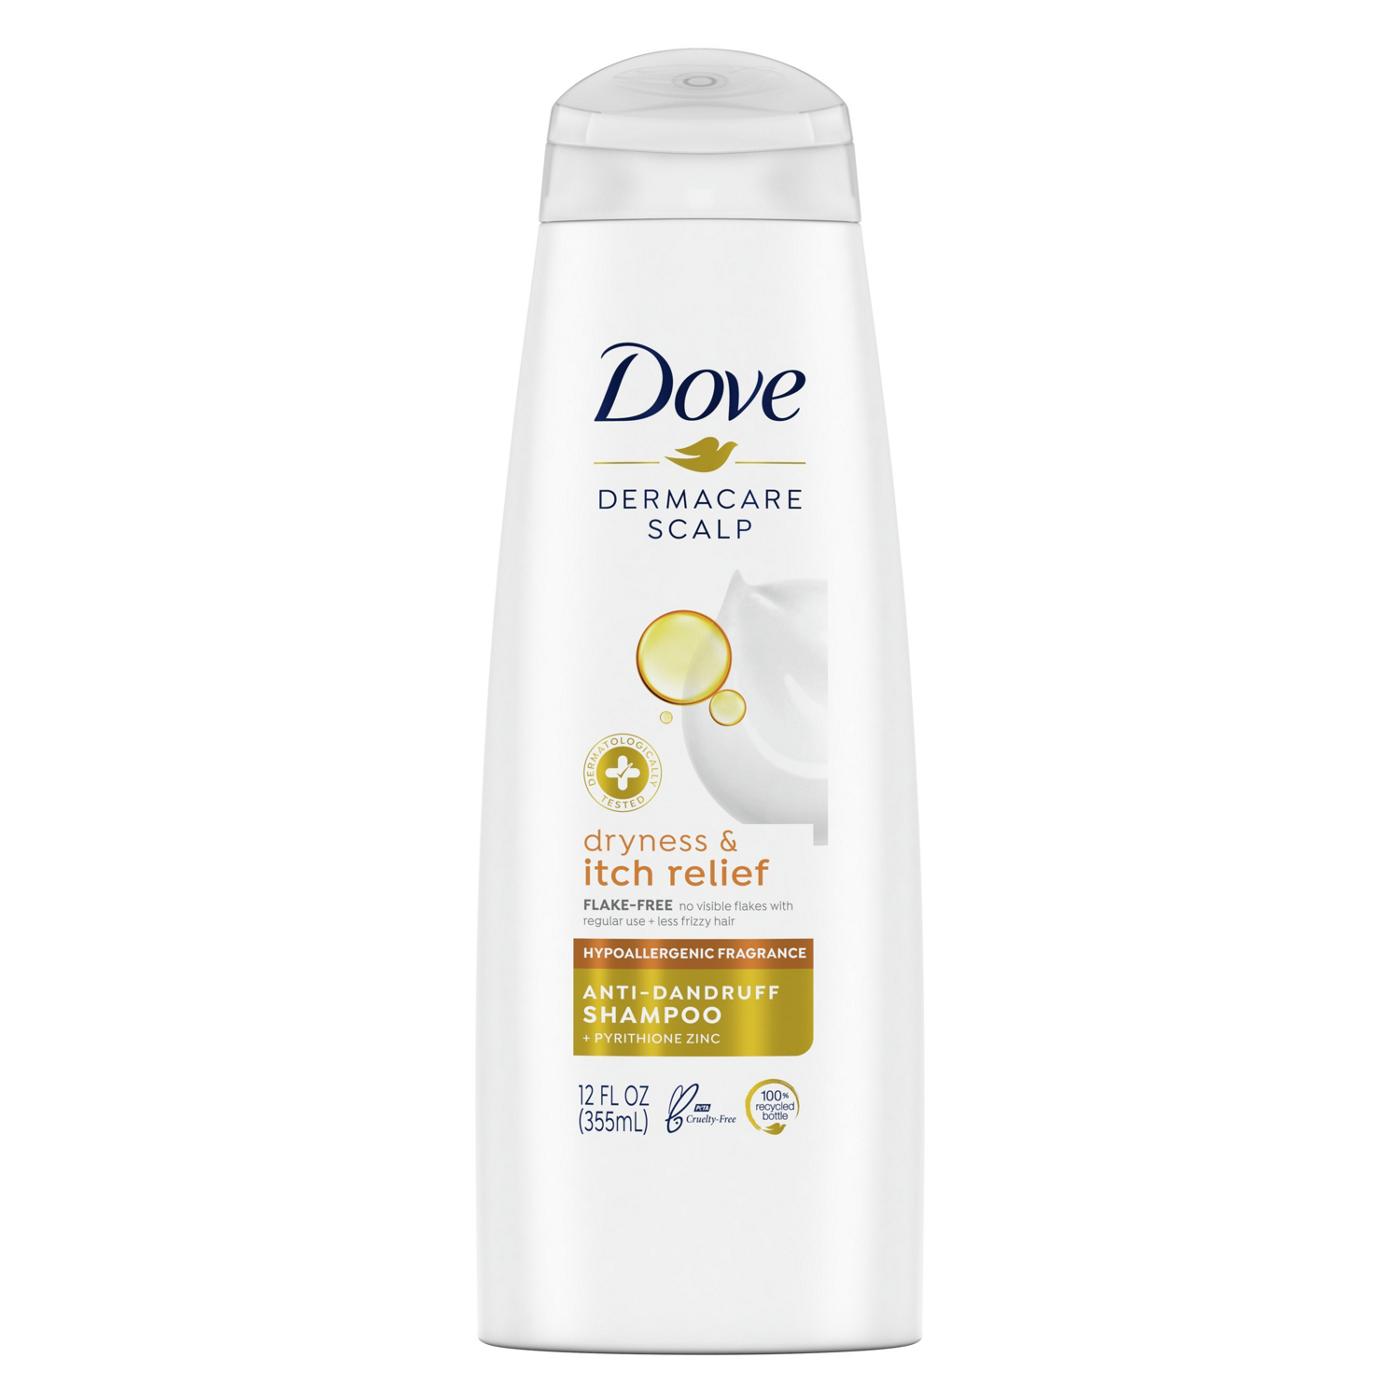 Dove DermaCare Scalp Anti-Dandruff Shampoo - Dryness & Itch Relief; image 1 of 5